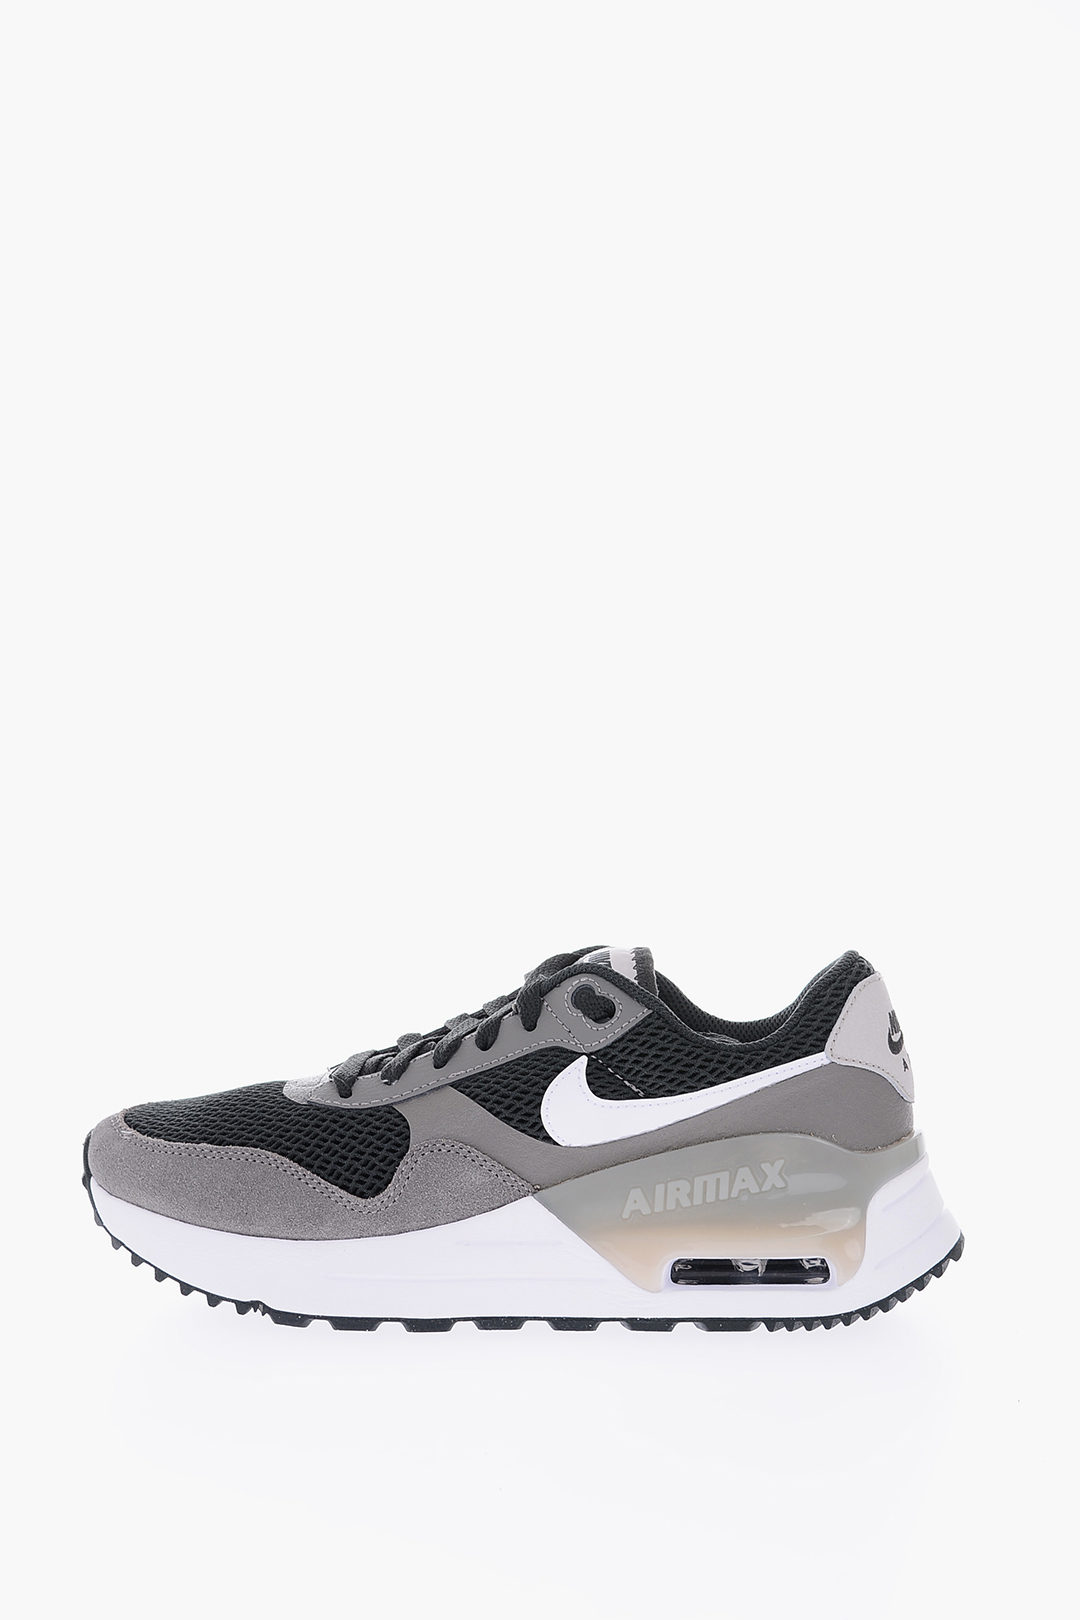 Nike and Fabric AIR MAX SYSTM men - Glamood Outlet